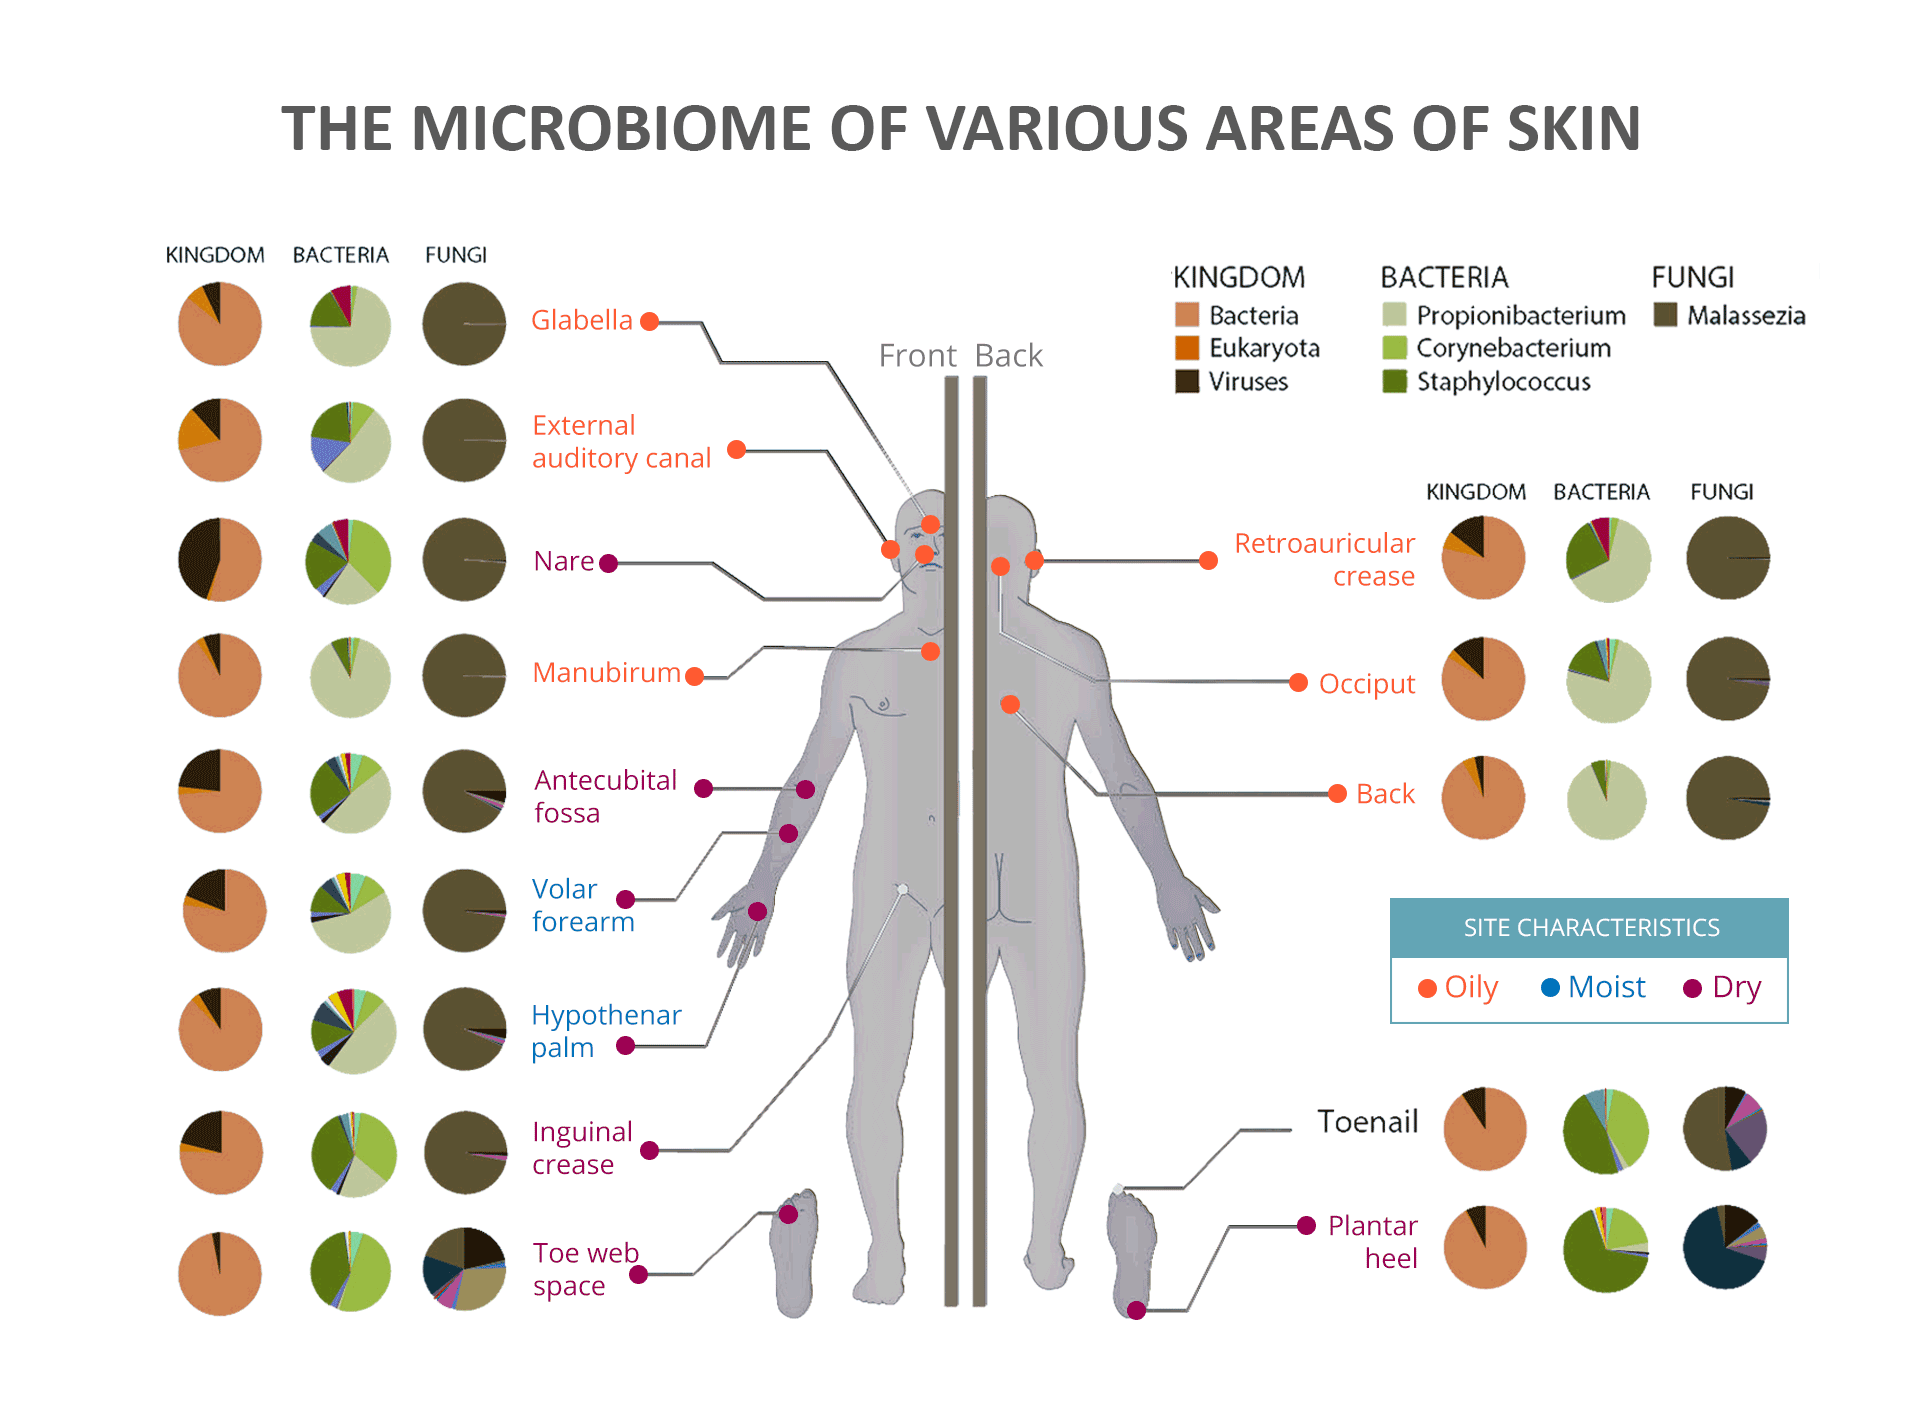 The Microbiome of Various Areas of the Skin - Microbial and Fungi Communities and Skin Characteristics